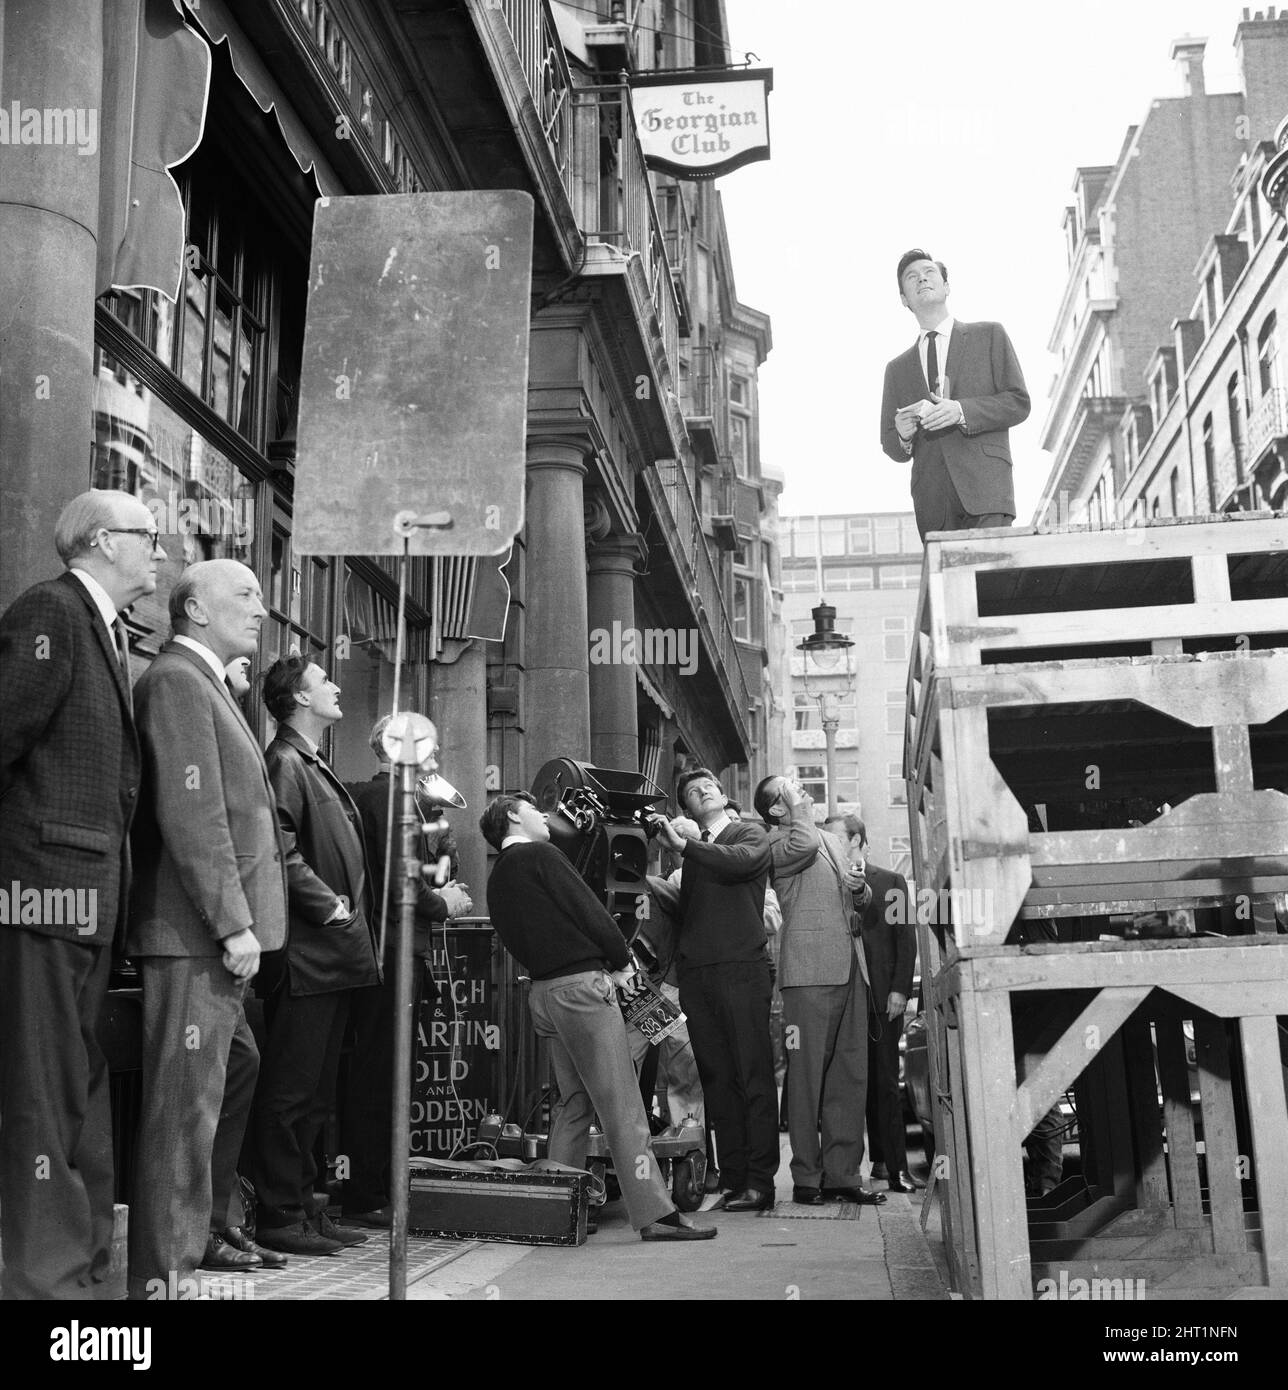 Life at the Top, 1965 film, on location filming around The Economist building in St James, London, SW1, Sunday 25th July 1965. The film stars Laurence Harvey, who reprises the role of Joe Lampton in a sequel to 1959 film Room at the Top.  Our picture shows .. filming outside The Georgian Club. Stock Photo